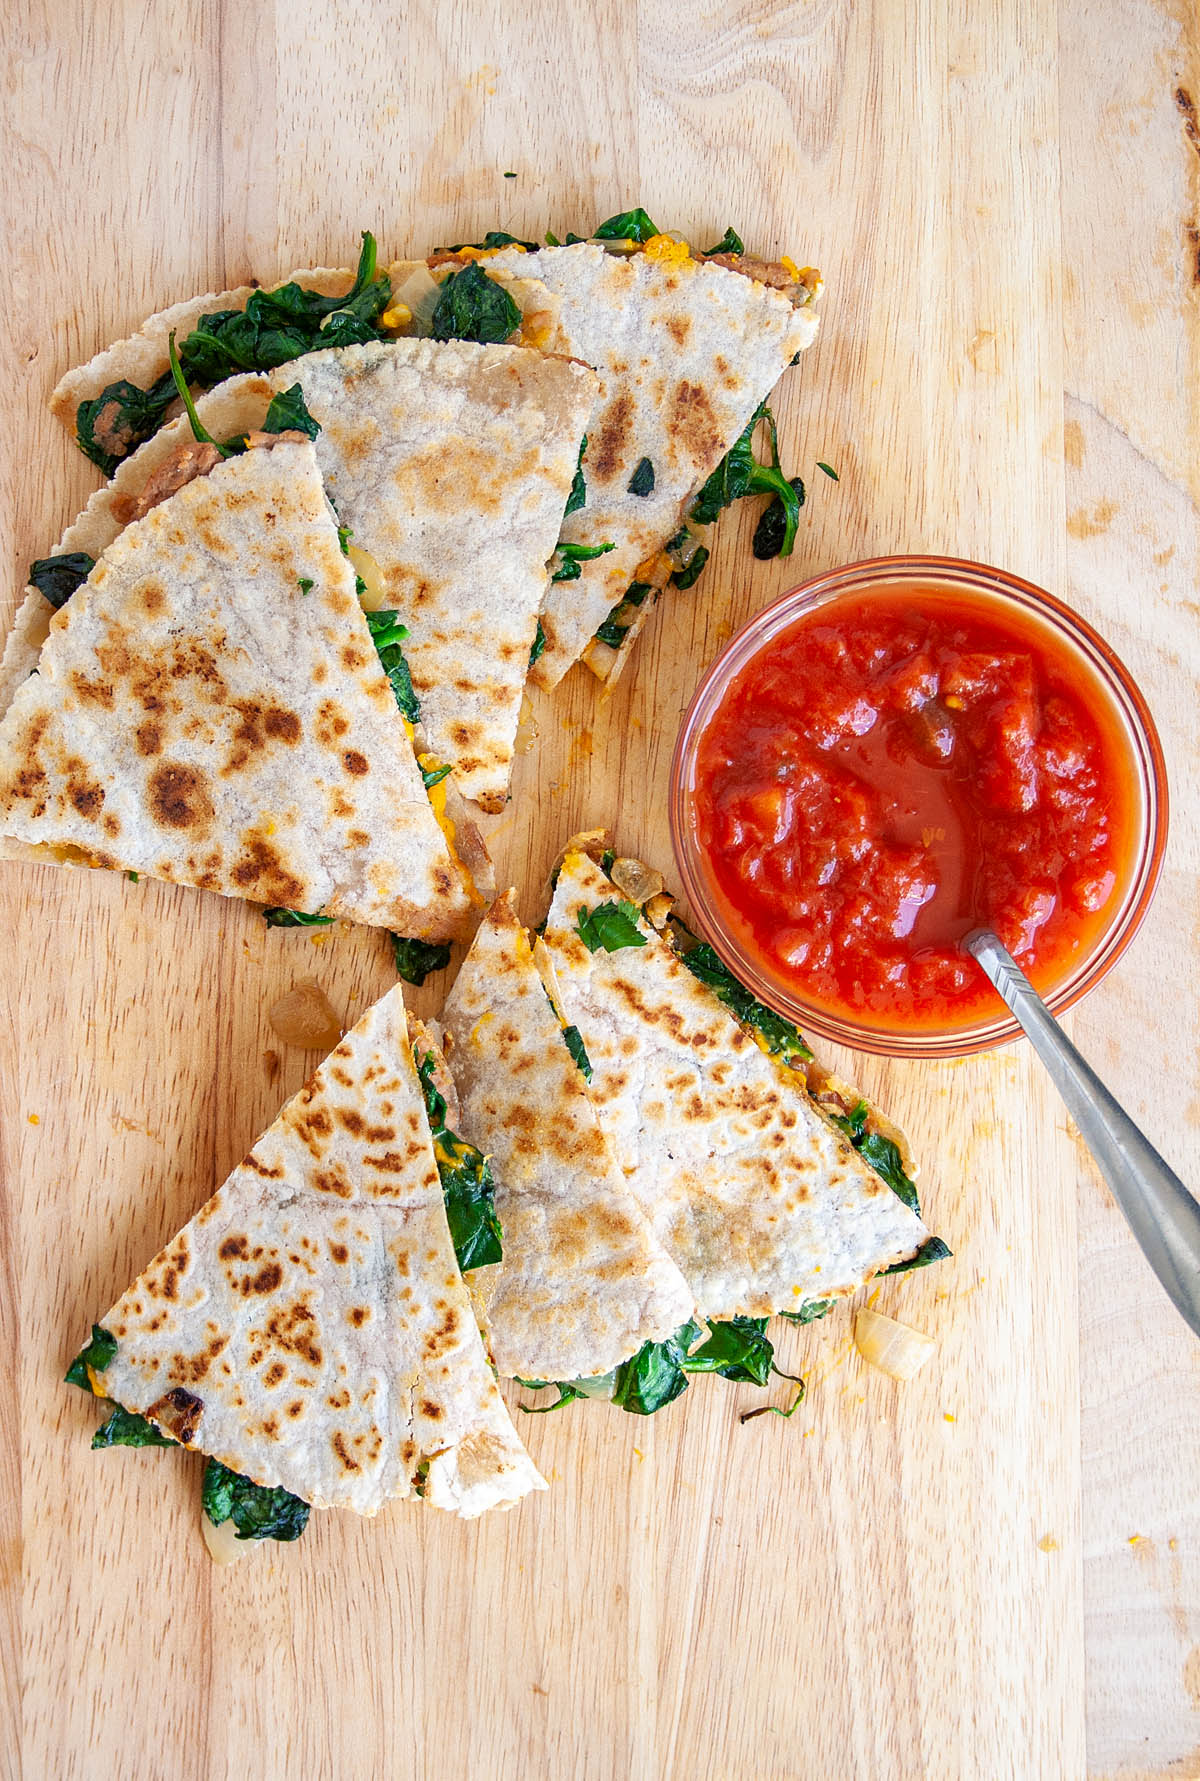 Spinach and Refried Bean Quesadilla with salsa.